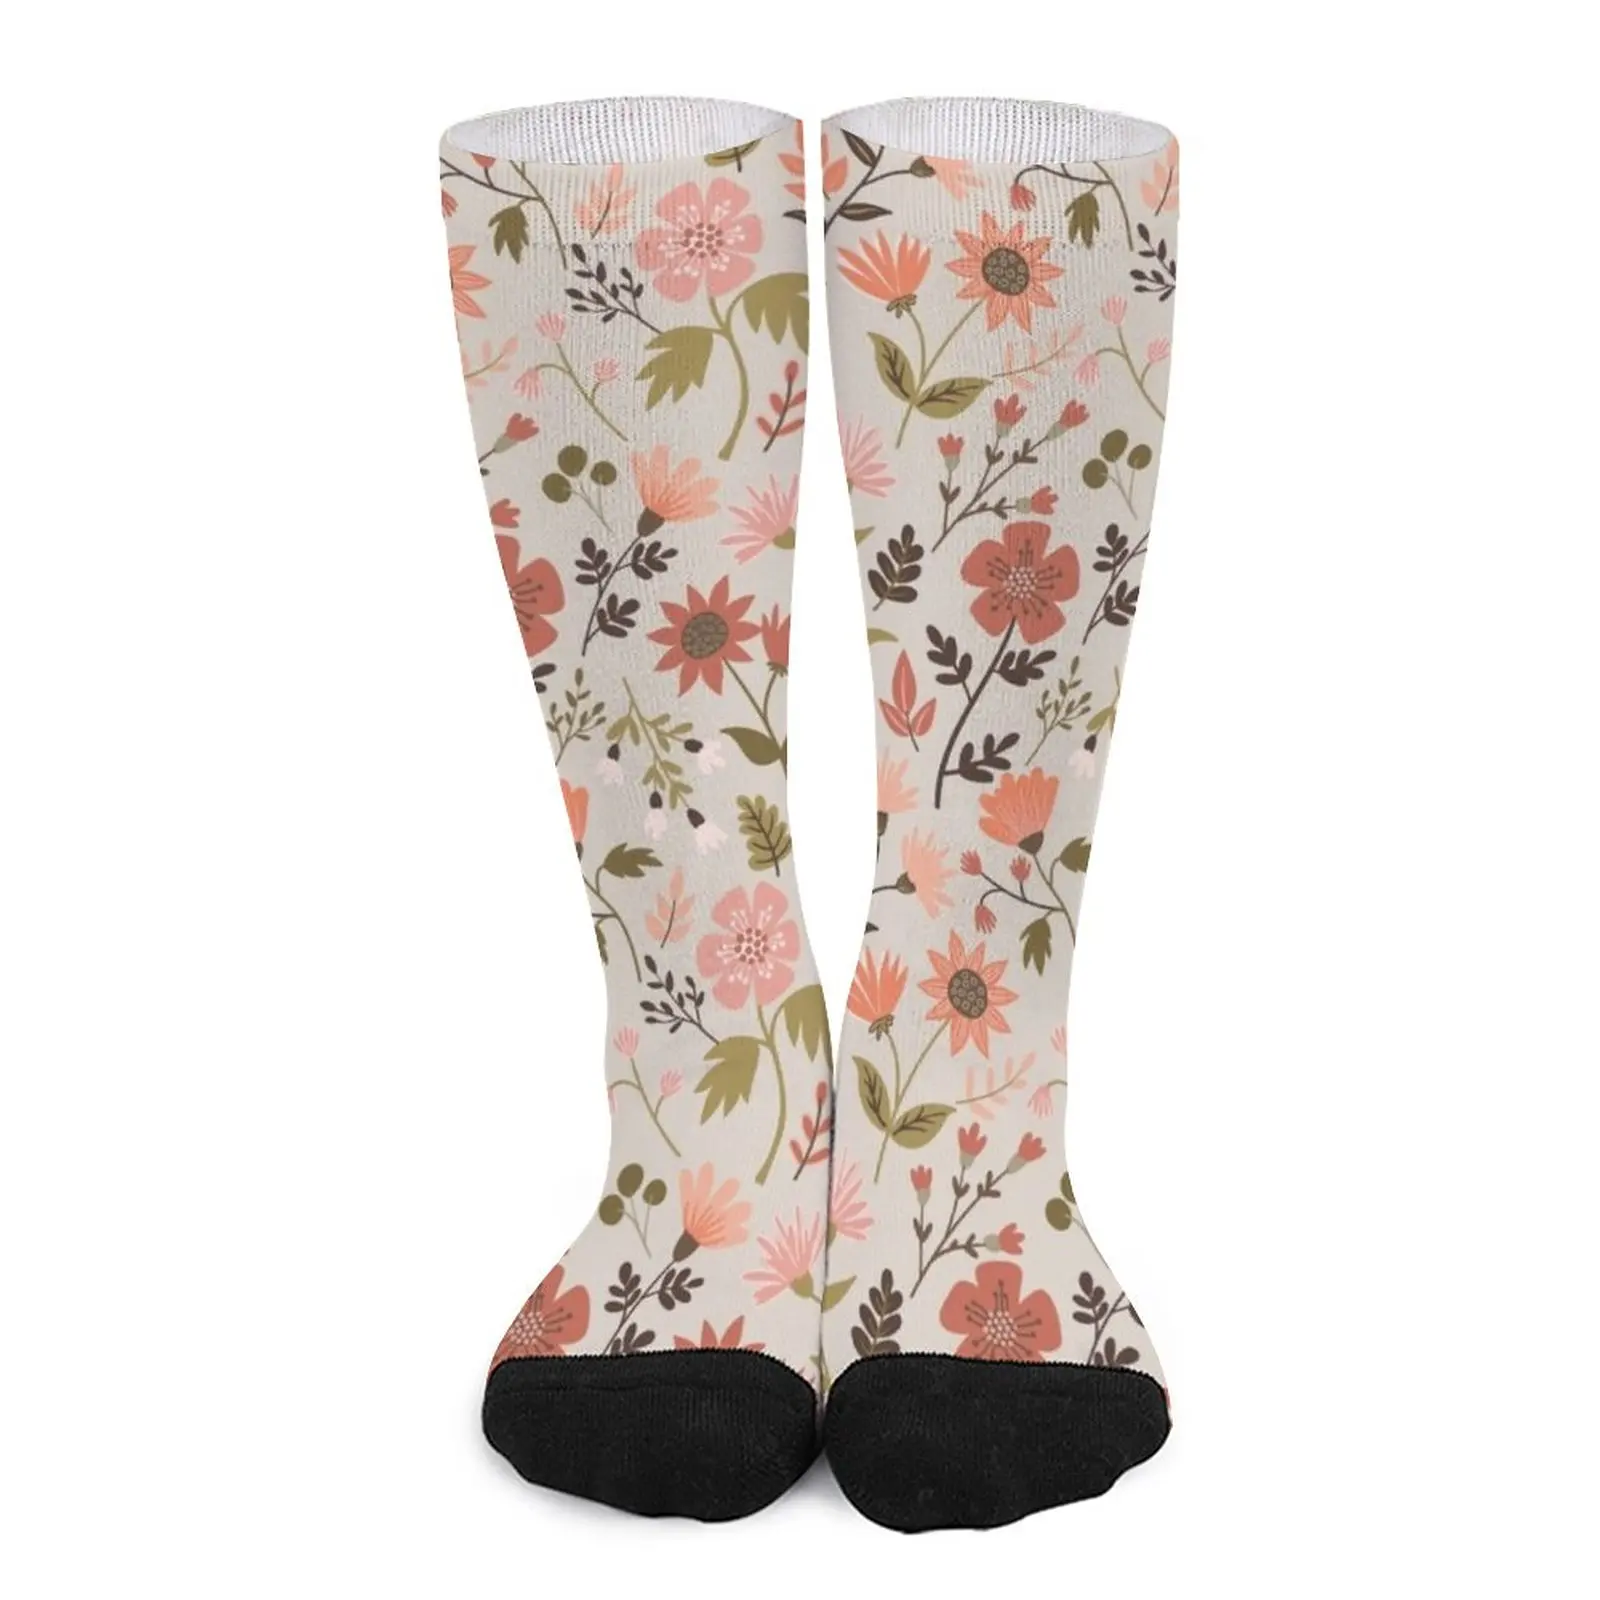 Fall Foliage Floral and Leaf Print Shades of Pink & Green Socks Funny socks woman Novelties socks for men Funny socks little helicopter socks luxe floral woman socks men s